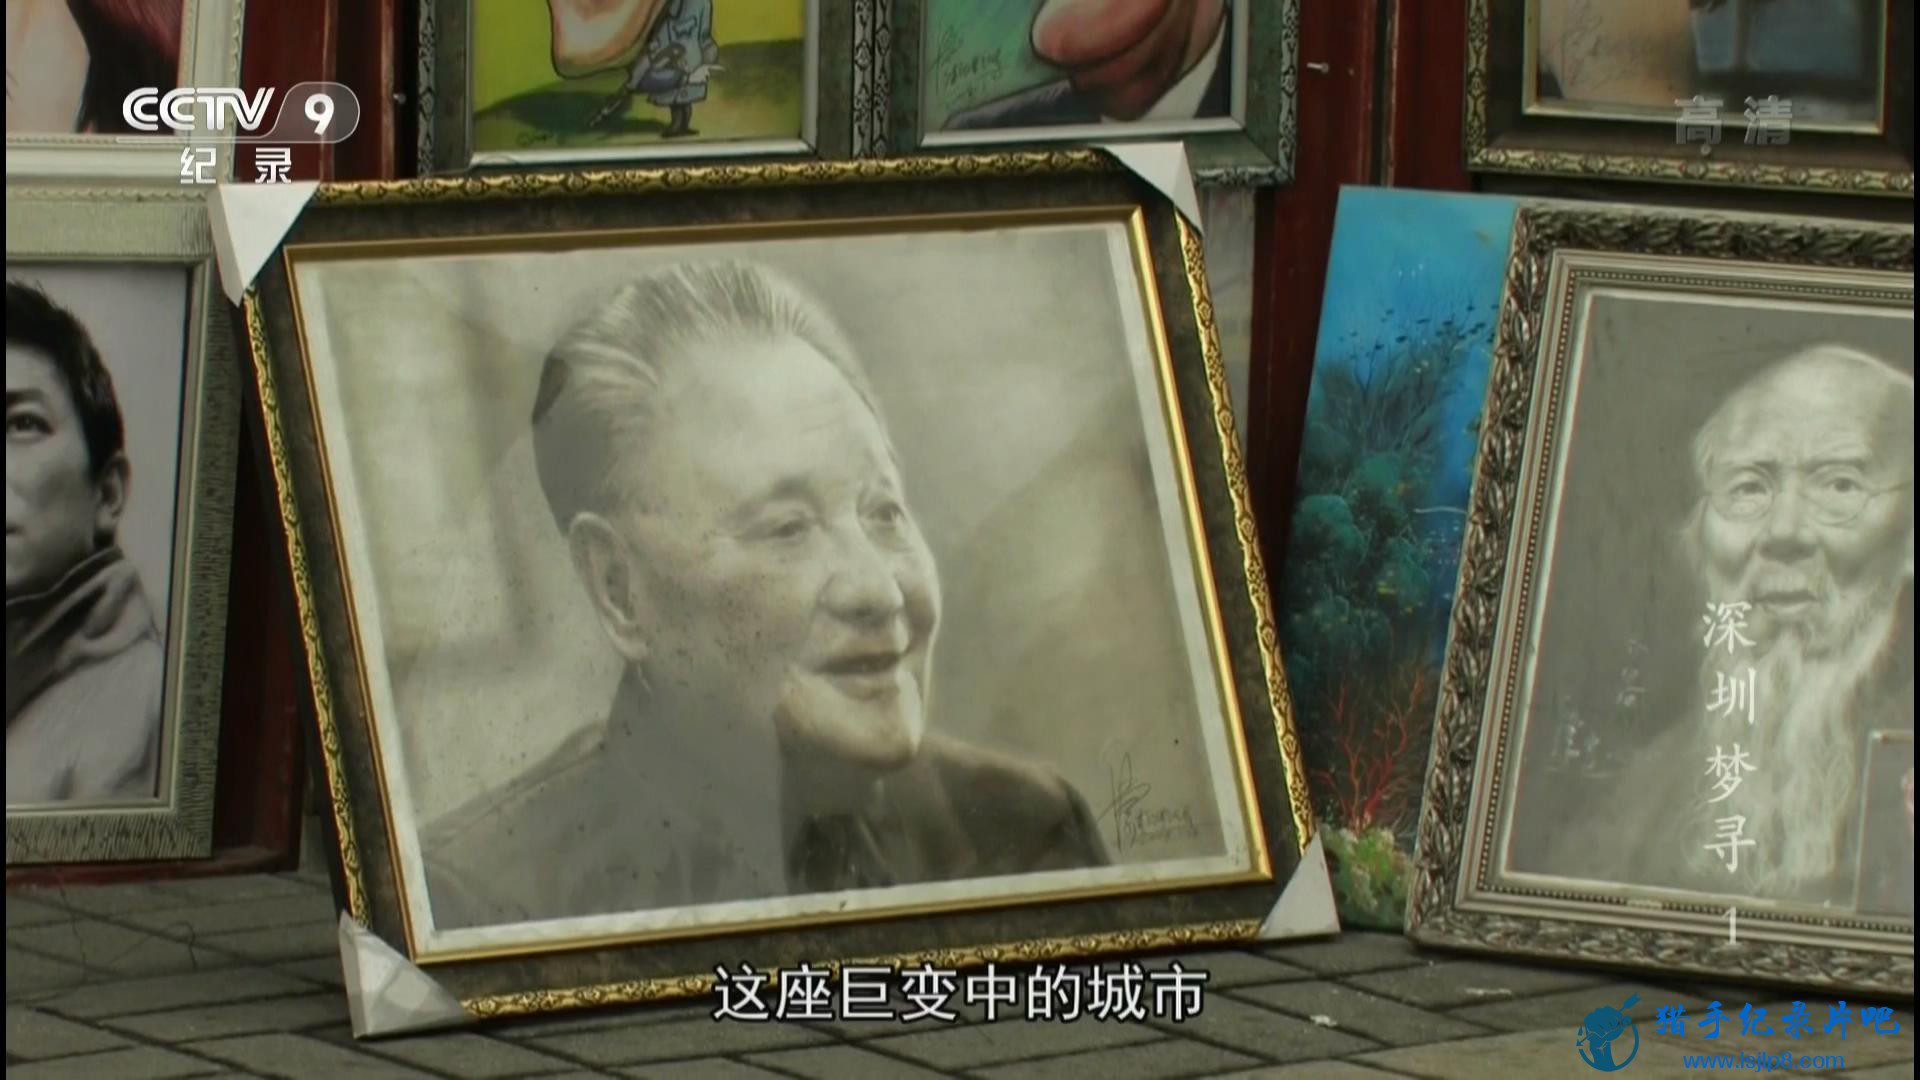 20150914_CCTV-9_Time-The.Oral.History.of.Shenzhen.EP01-jlp_20171231223716.JPG